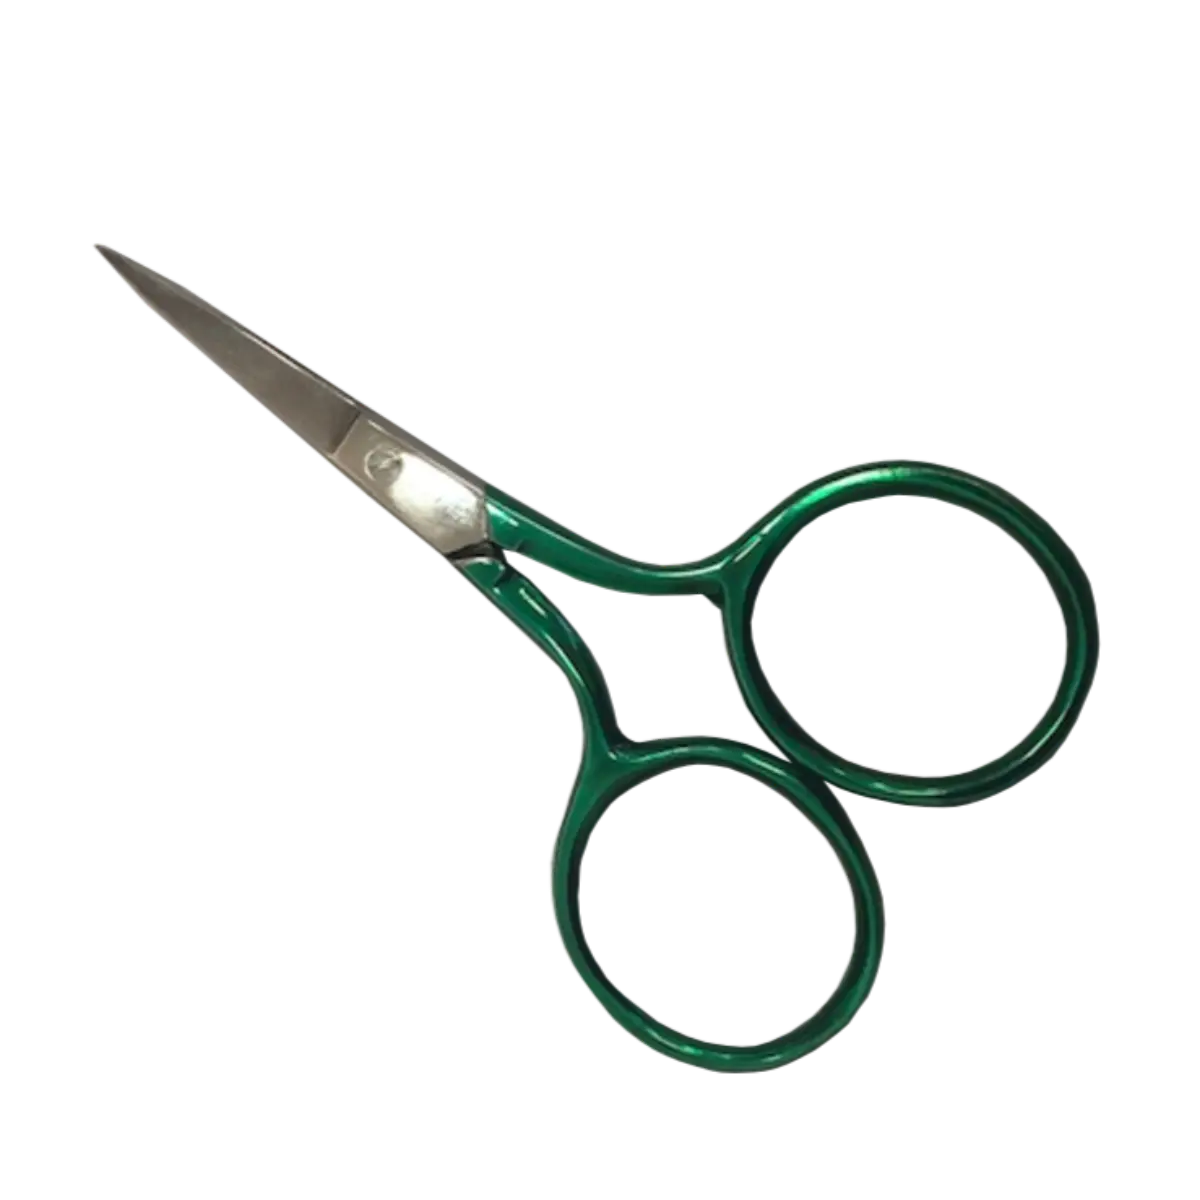 Fine Point Wide Bow Embroidery Craft Scissors By Spectrim